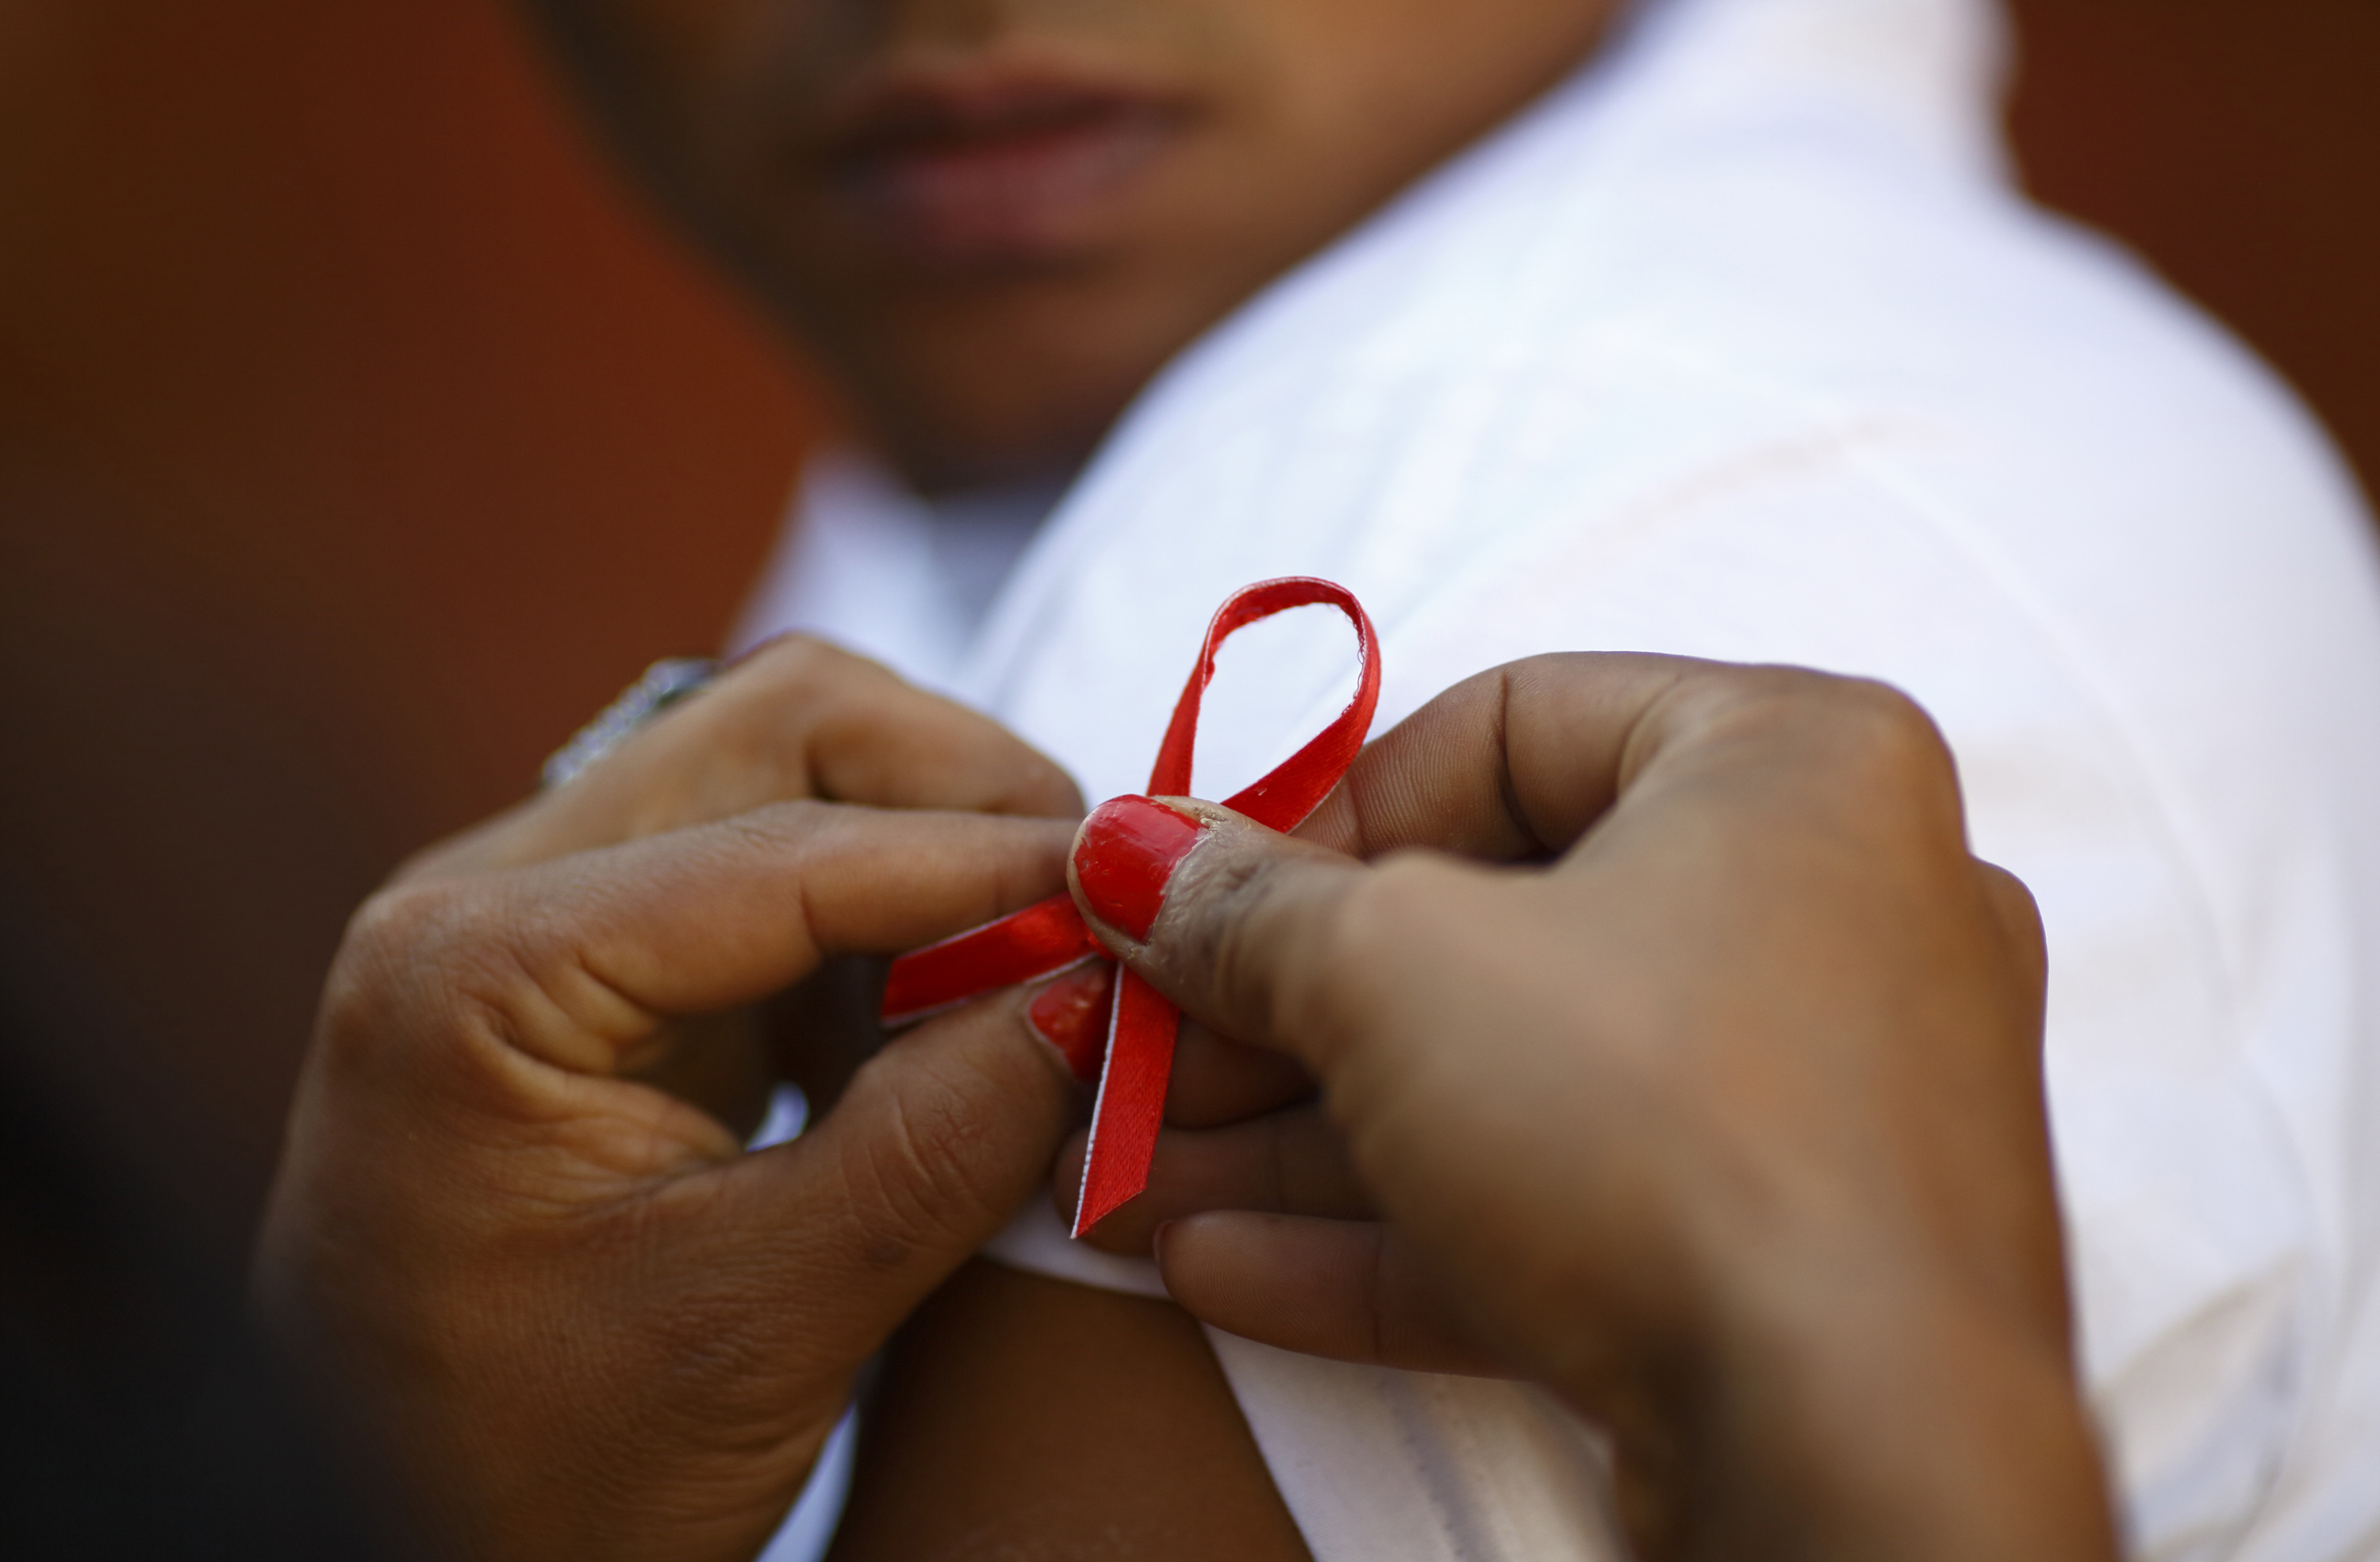 A red ribbon is put on the sleeves of a man by his friend to show support for people living with HIV during a program to raise awareness about AIDS on World AIDS Day in Kathmandu on Dec. 1, 2013 (Navesh Chitrakar—Reuters)